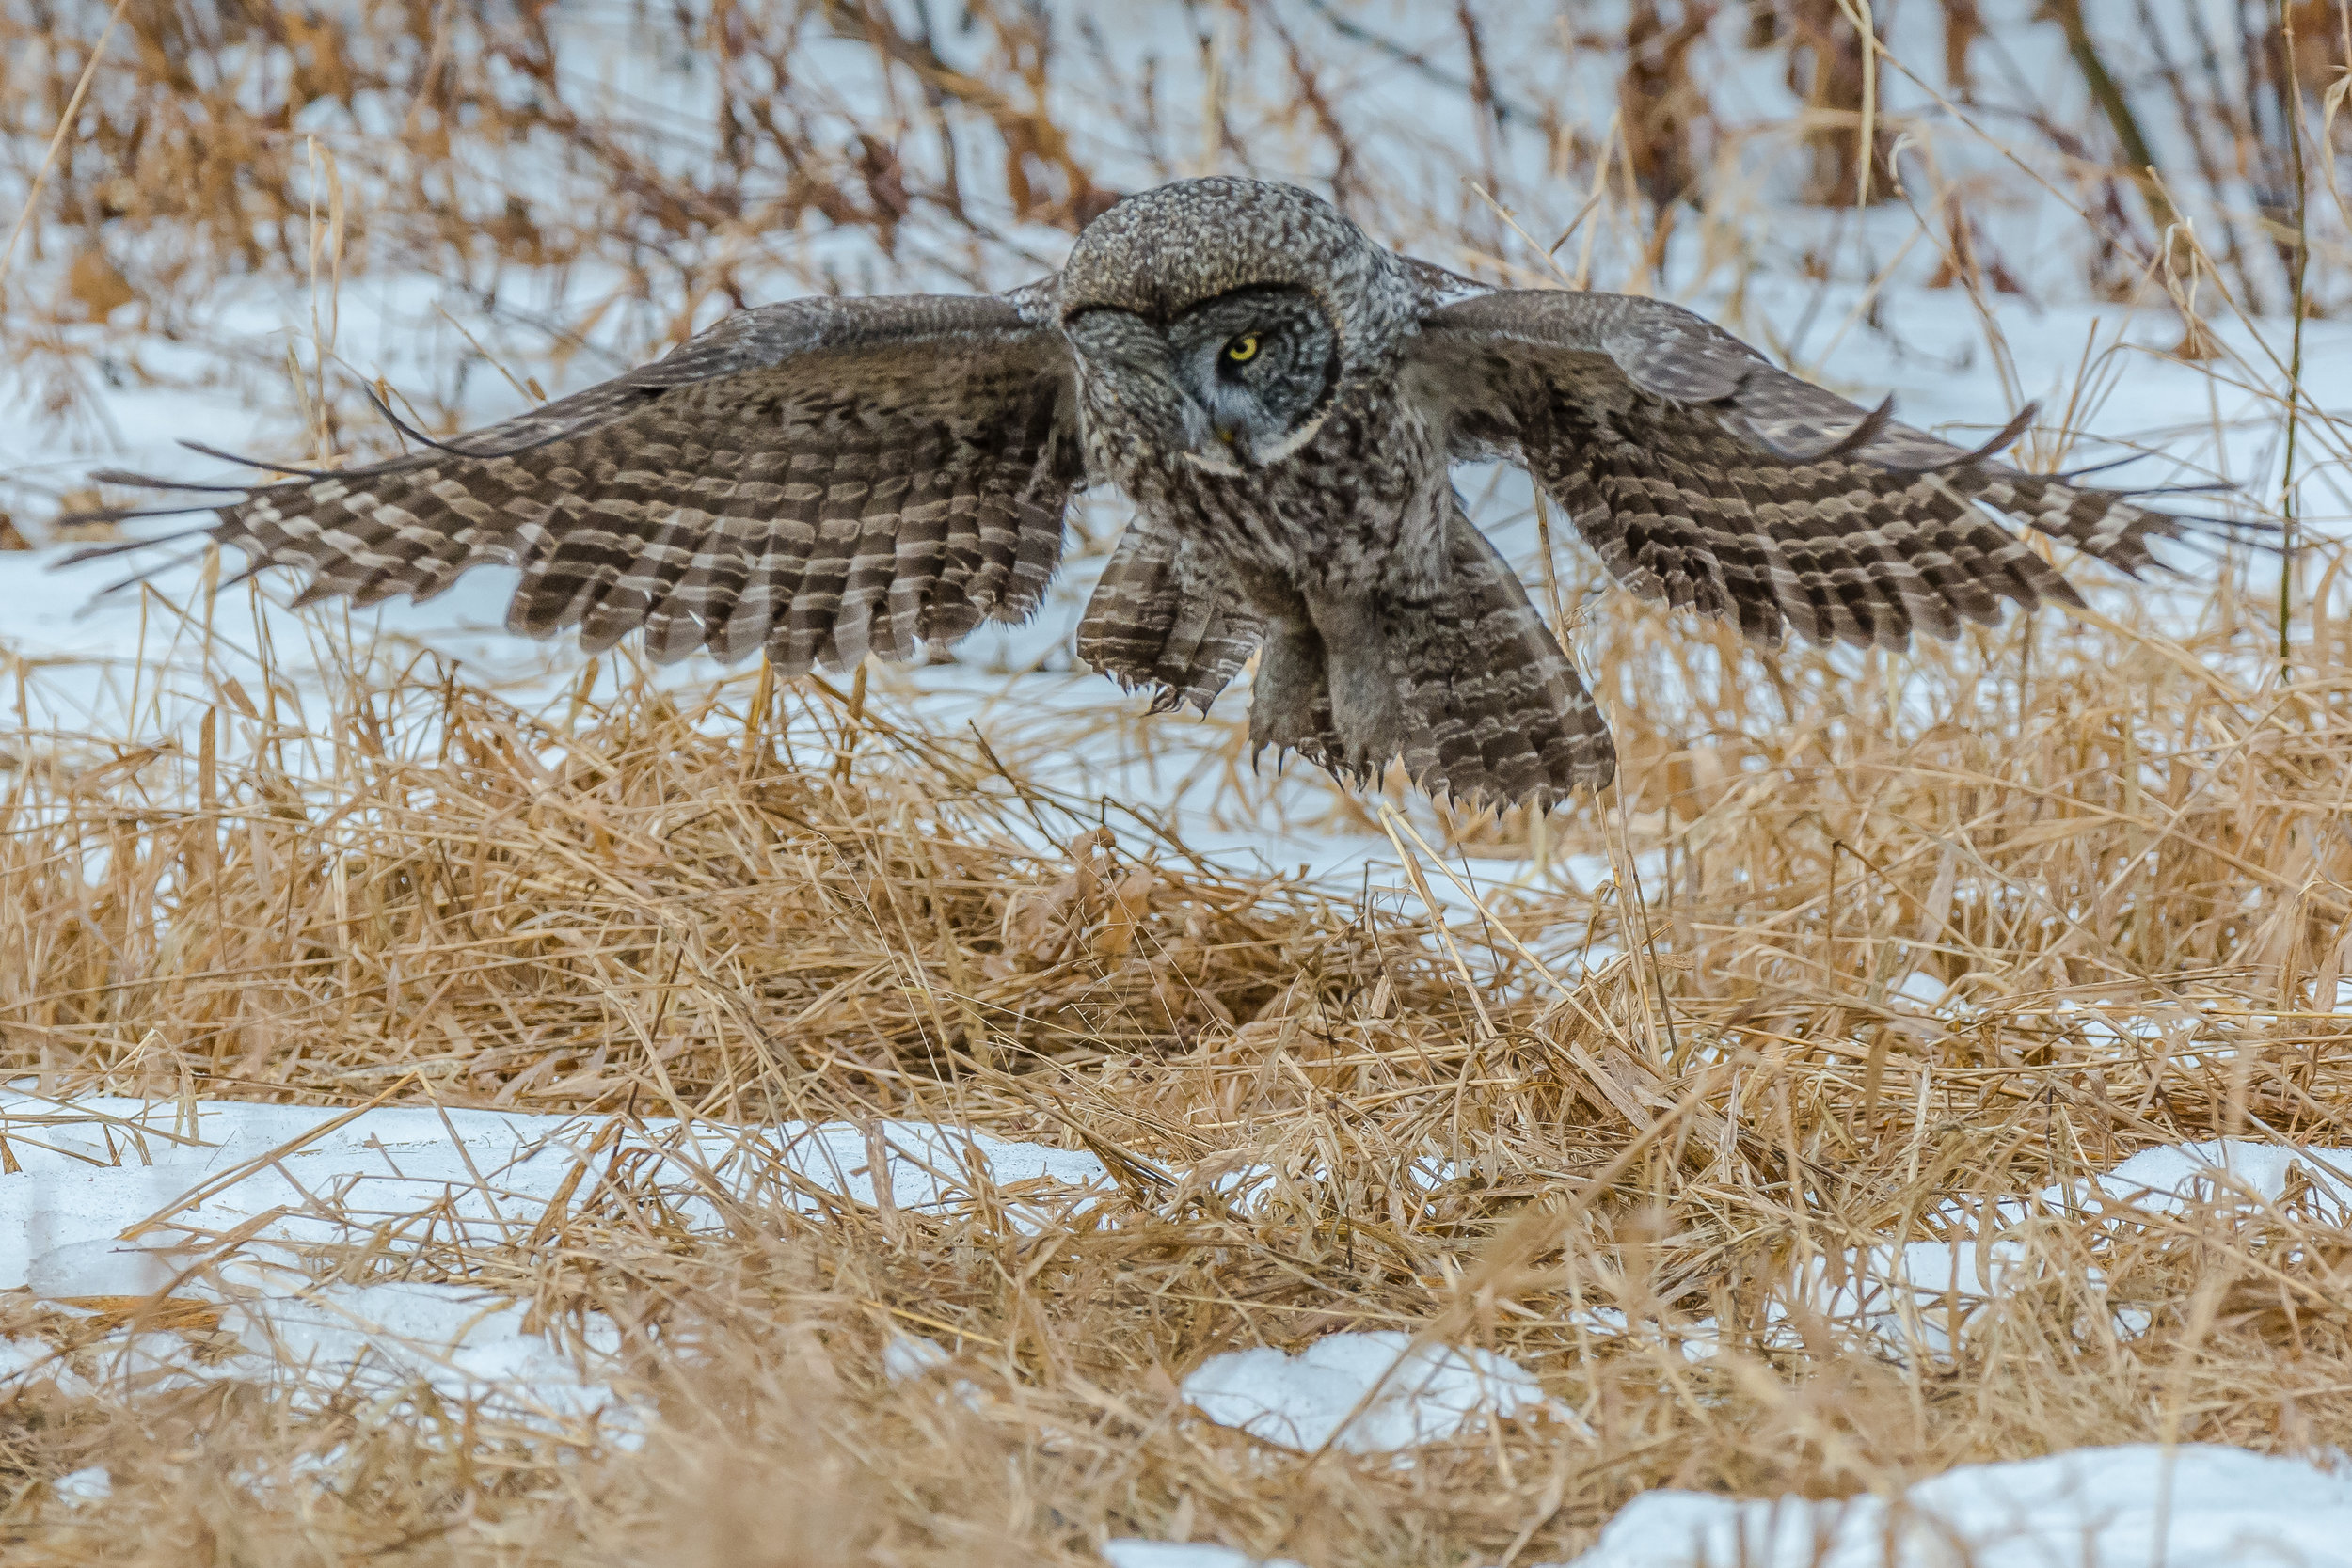   Incoming &nbsp;!! &nbsp; I drove back north to see the great gray owl again today, &nbsp;he did not disappoint !! &nbsp;  